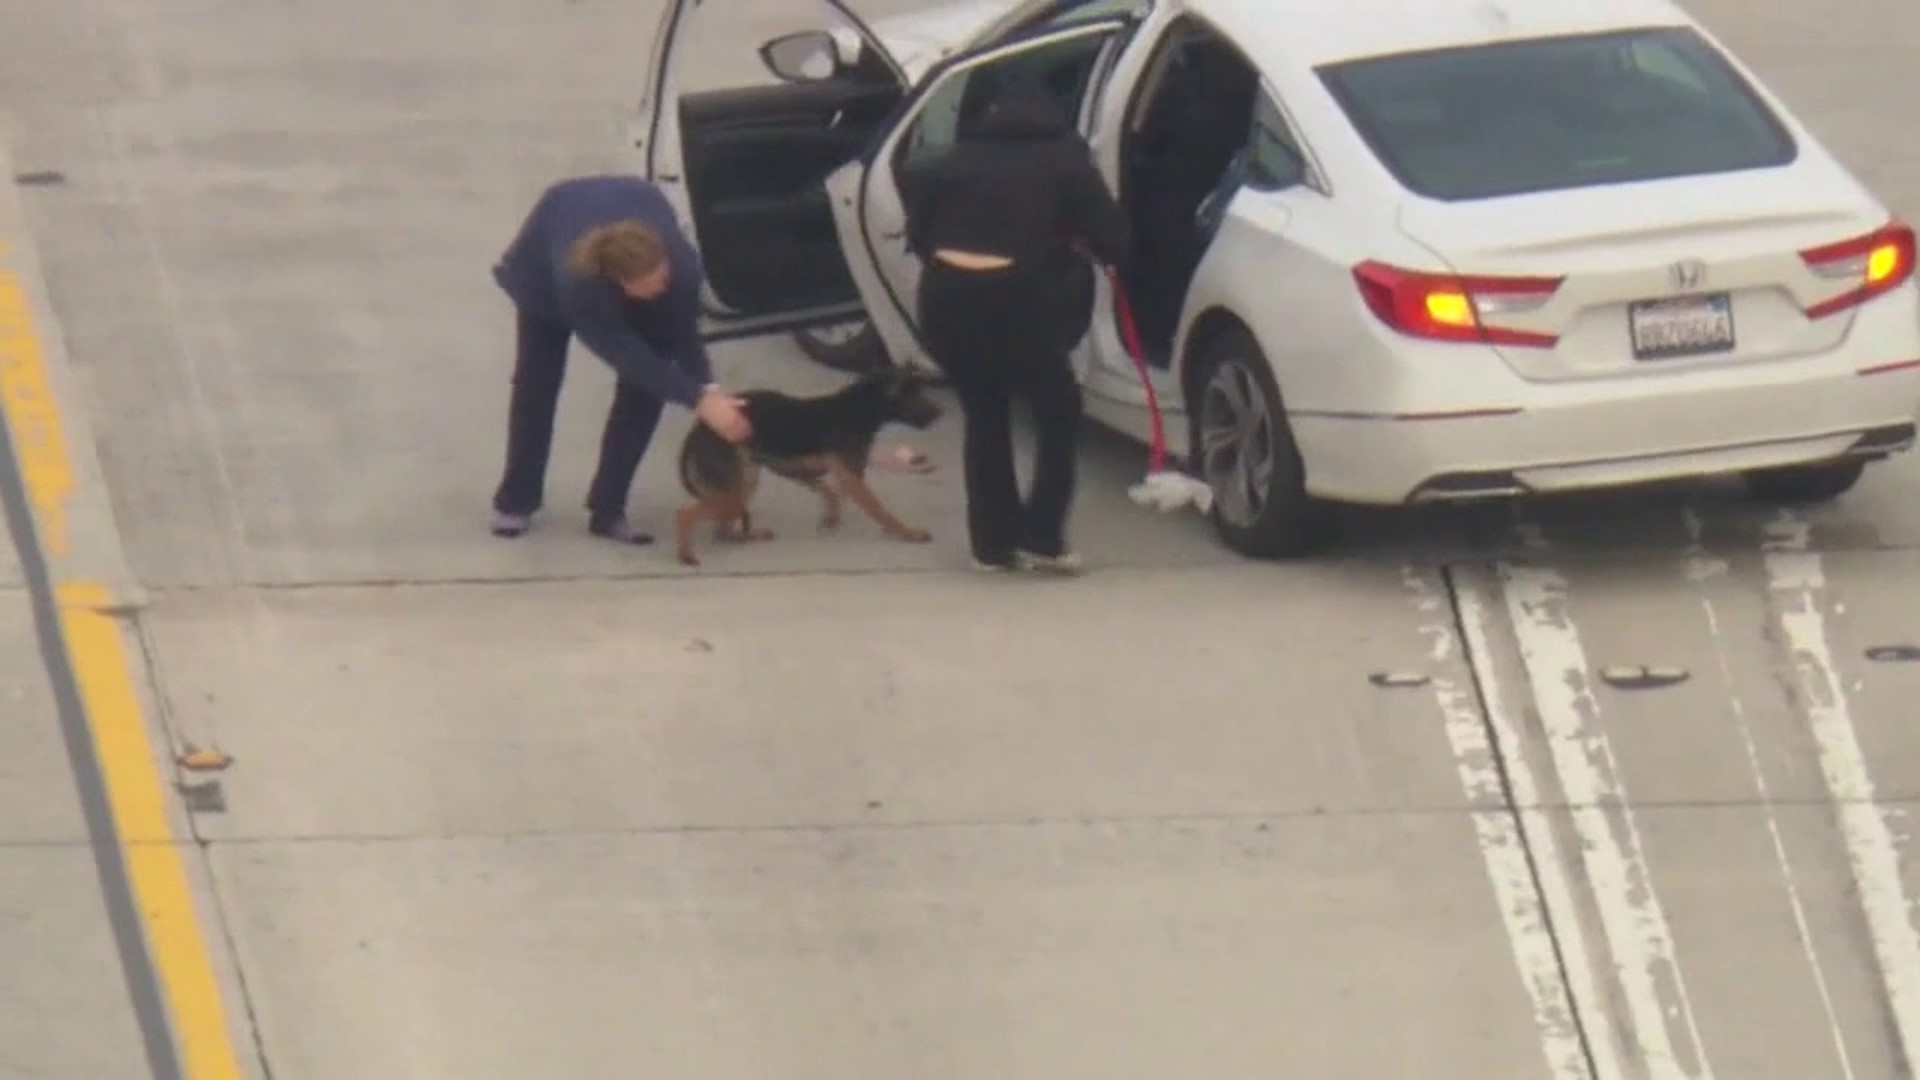 A woman helped capture a dog found running loose on a California freeway. The incident was caught on local TV.